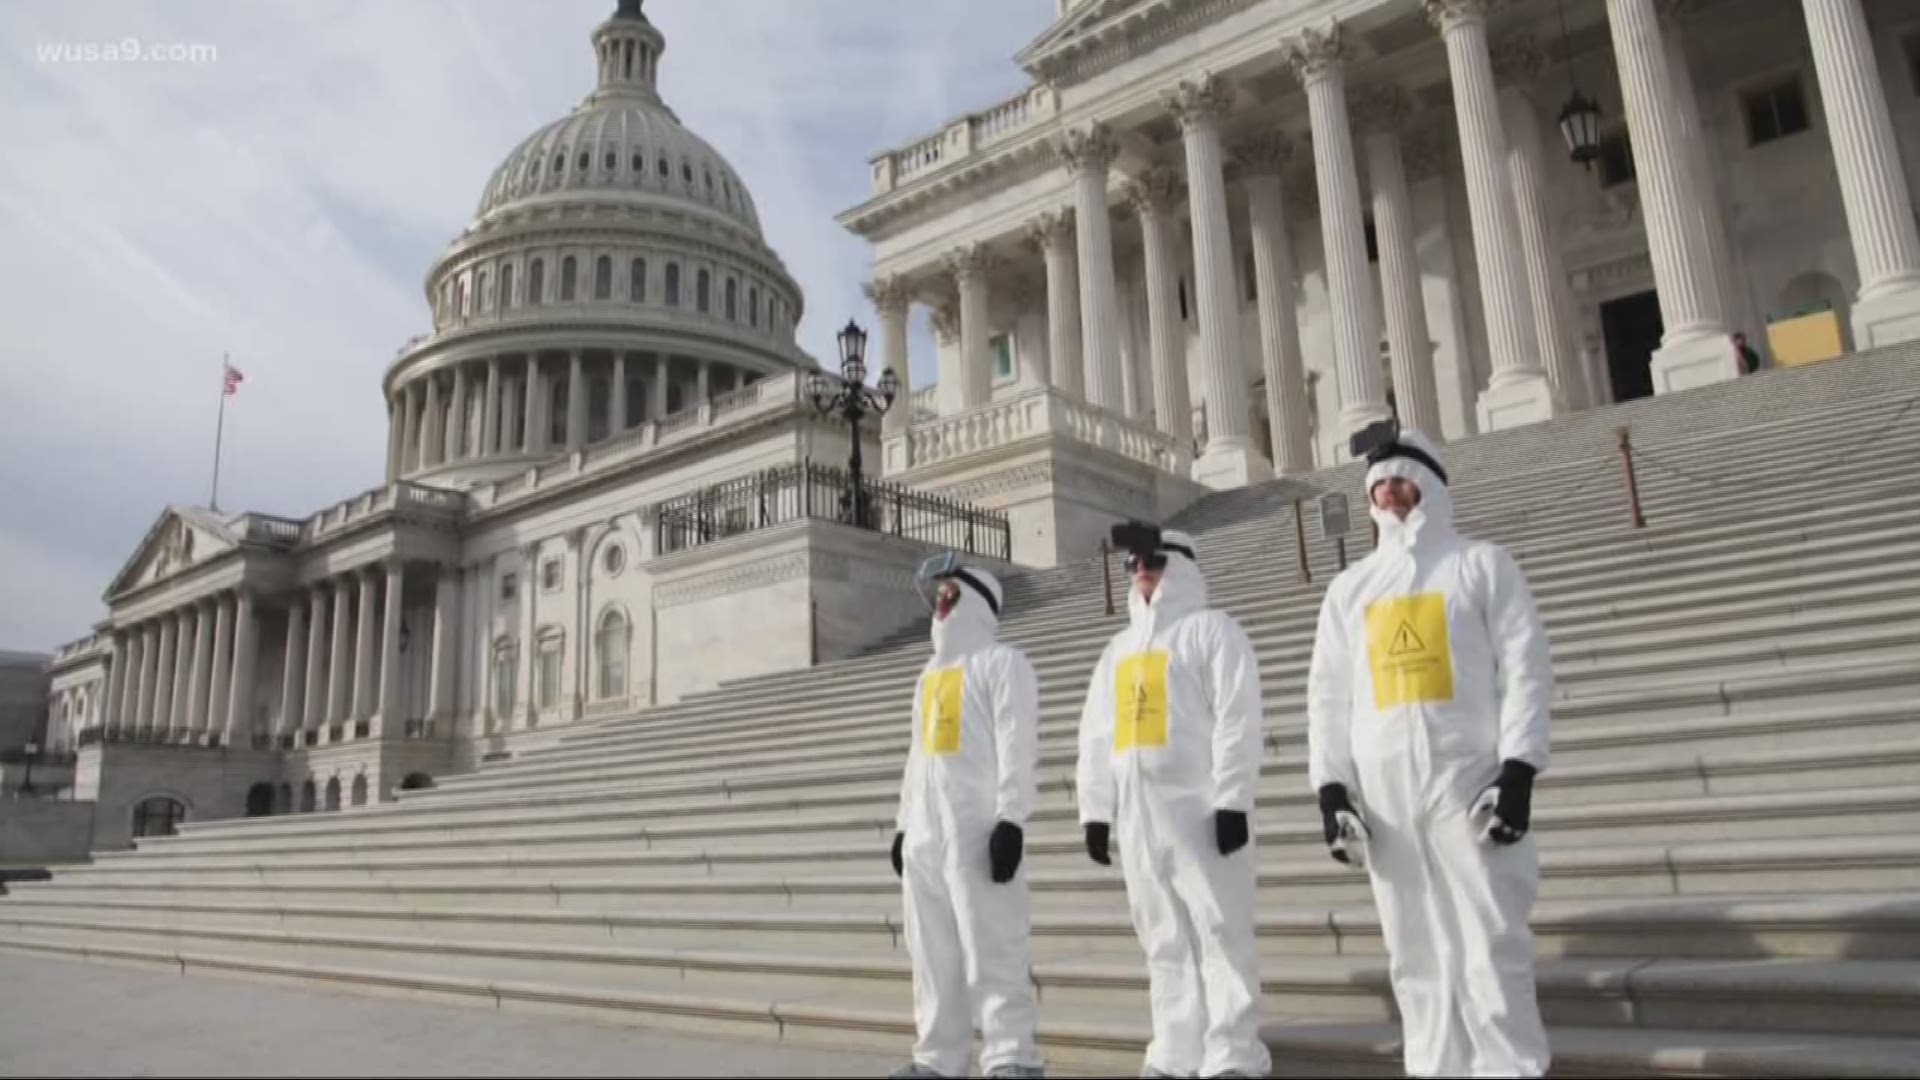 You asked us why people were walking around Capitol Hill wearing white Hazmat suits with phones strapped to their foreheads. WUSA9's Ariane Datil has your answer.